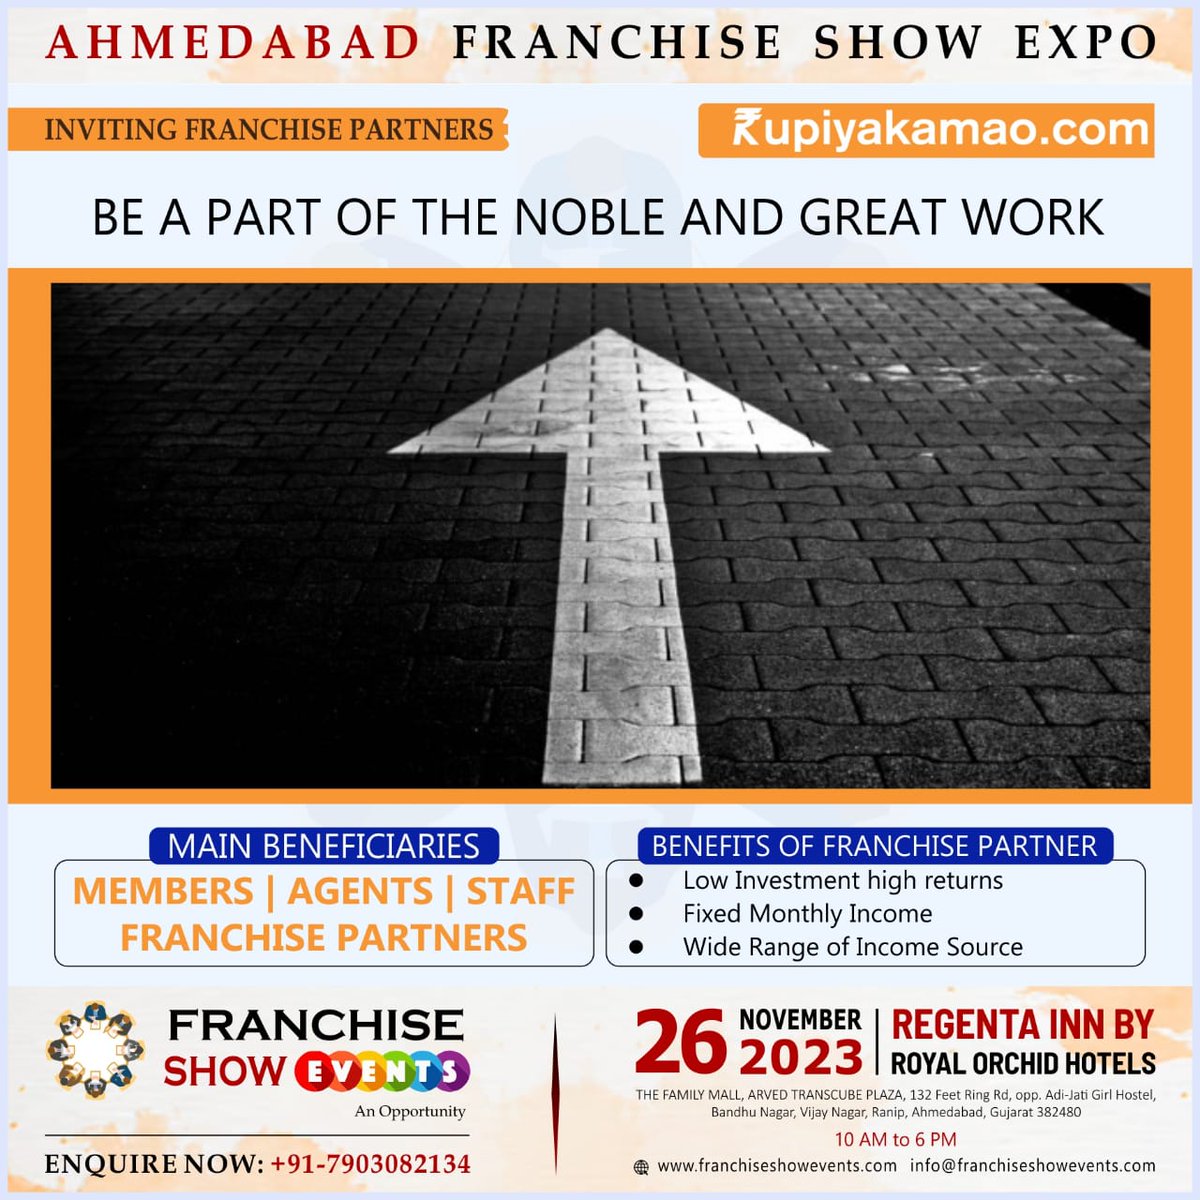 Rupiyakamao.com Inviting #FranchisePartners in India

Earn Money, Be Your #OwnBoss! Earn Money with Internet!

Meet us at #Ahmedabad #FranchiseShow on 26th Nov'23 in Hotel REGENTA INN RANIP from 10AM to 6PM.